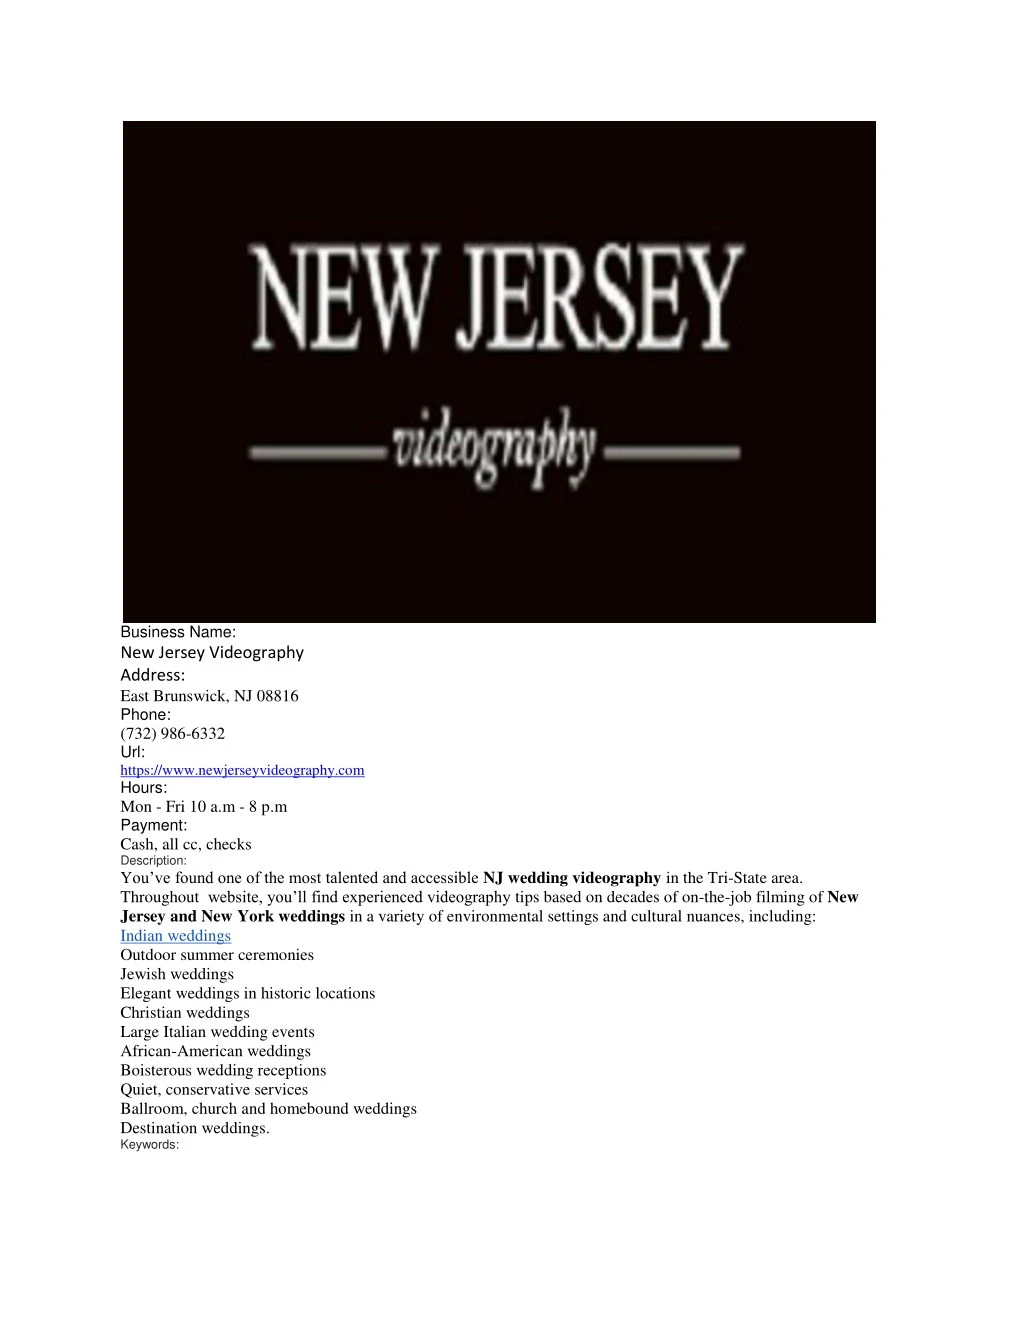 business name new jersey videography address east